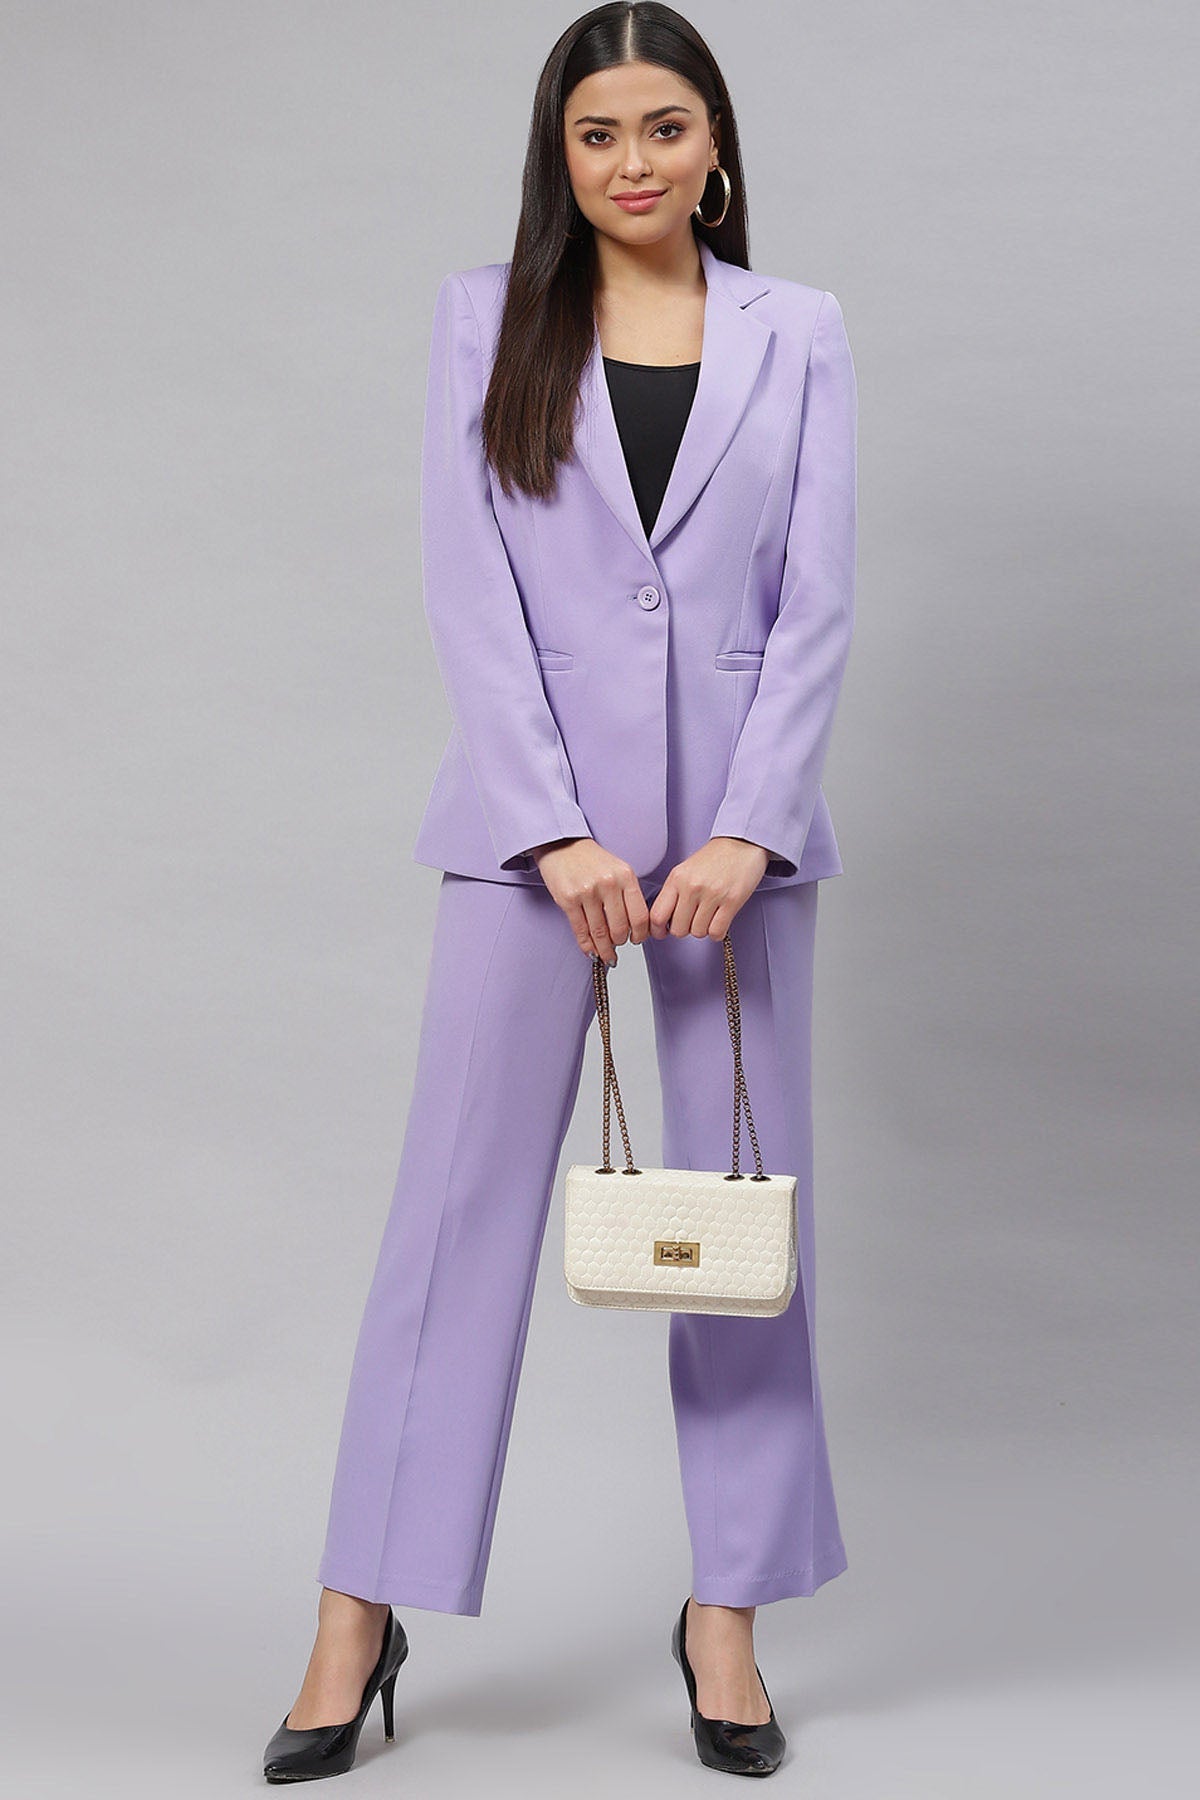 Buy PowerSutra Notched Lapel Pant Suit For Women Available online at  ScrollnShops